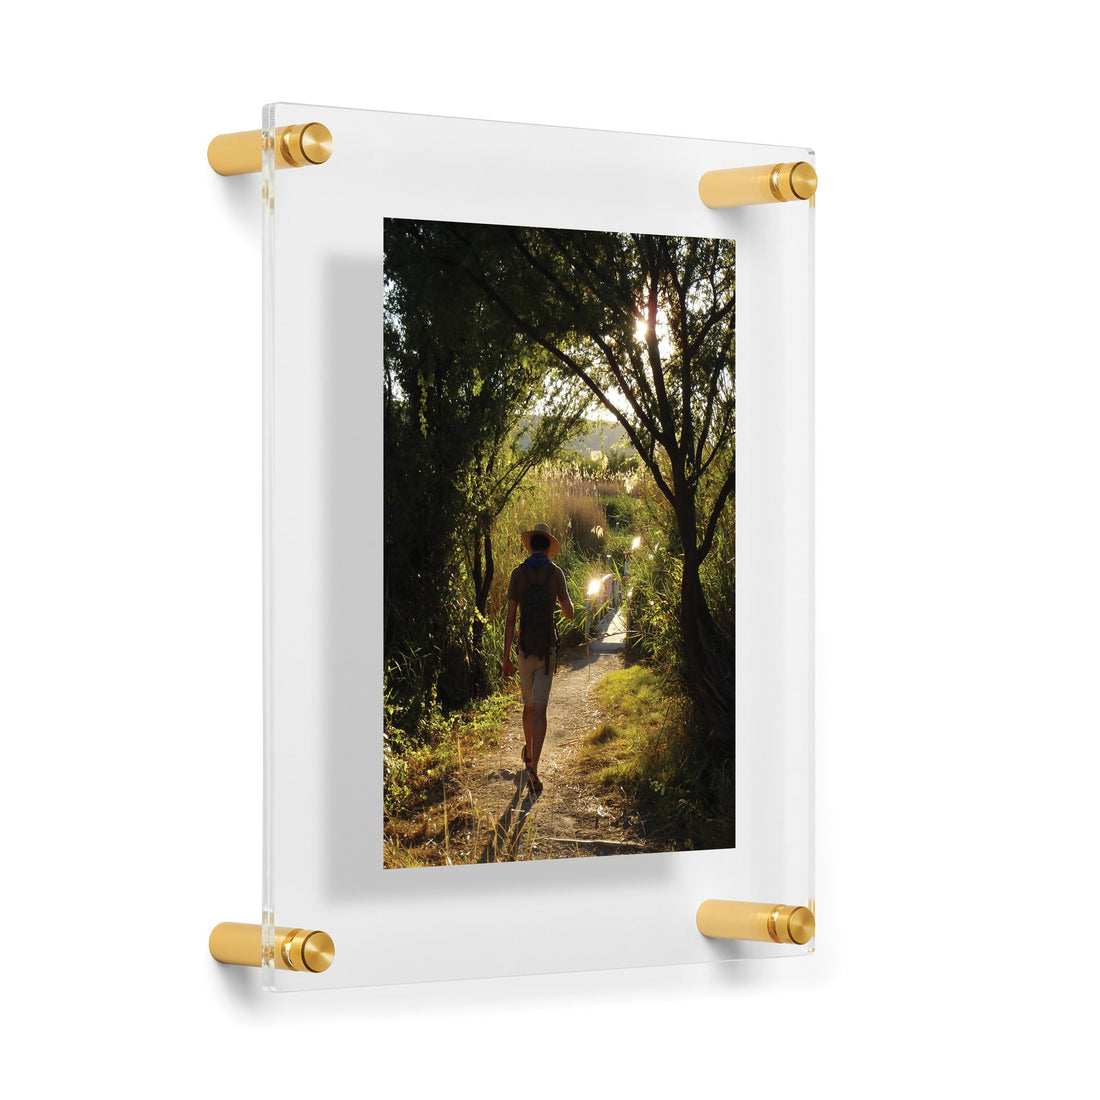 A framed photograph displaying a person walking along a sunlit forest path, encased in Wexel&